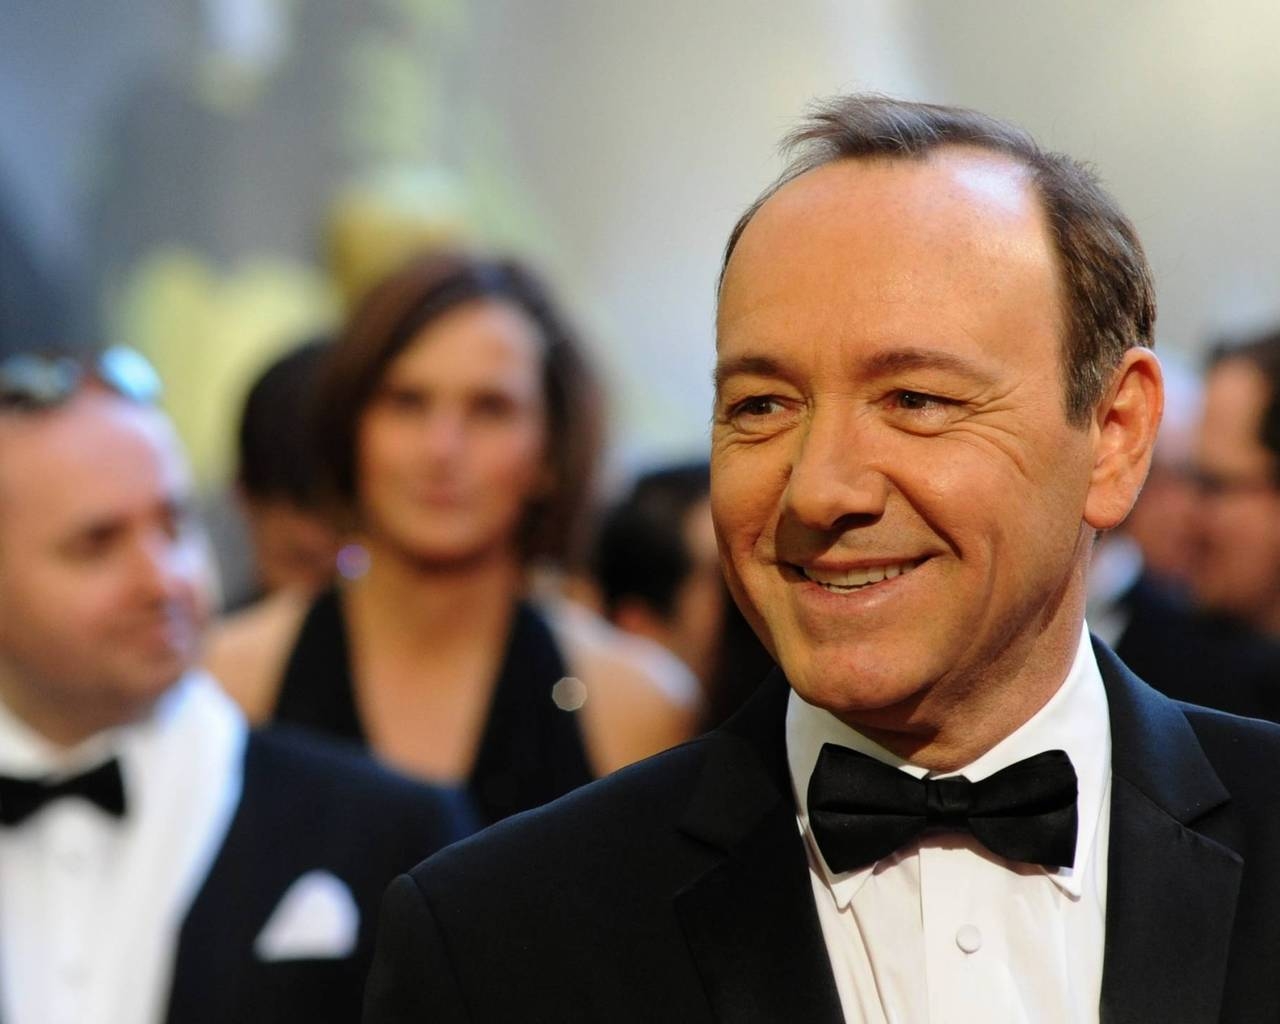 Kevin Spacey Smile for 1280 x 1024 resolution